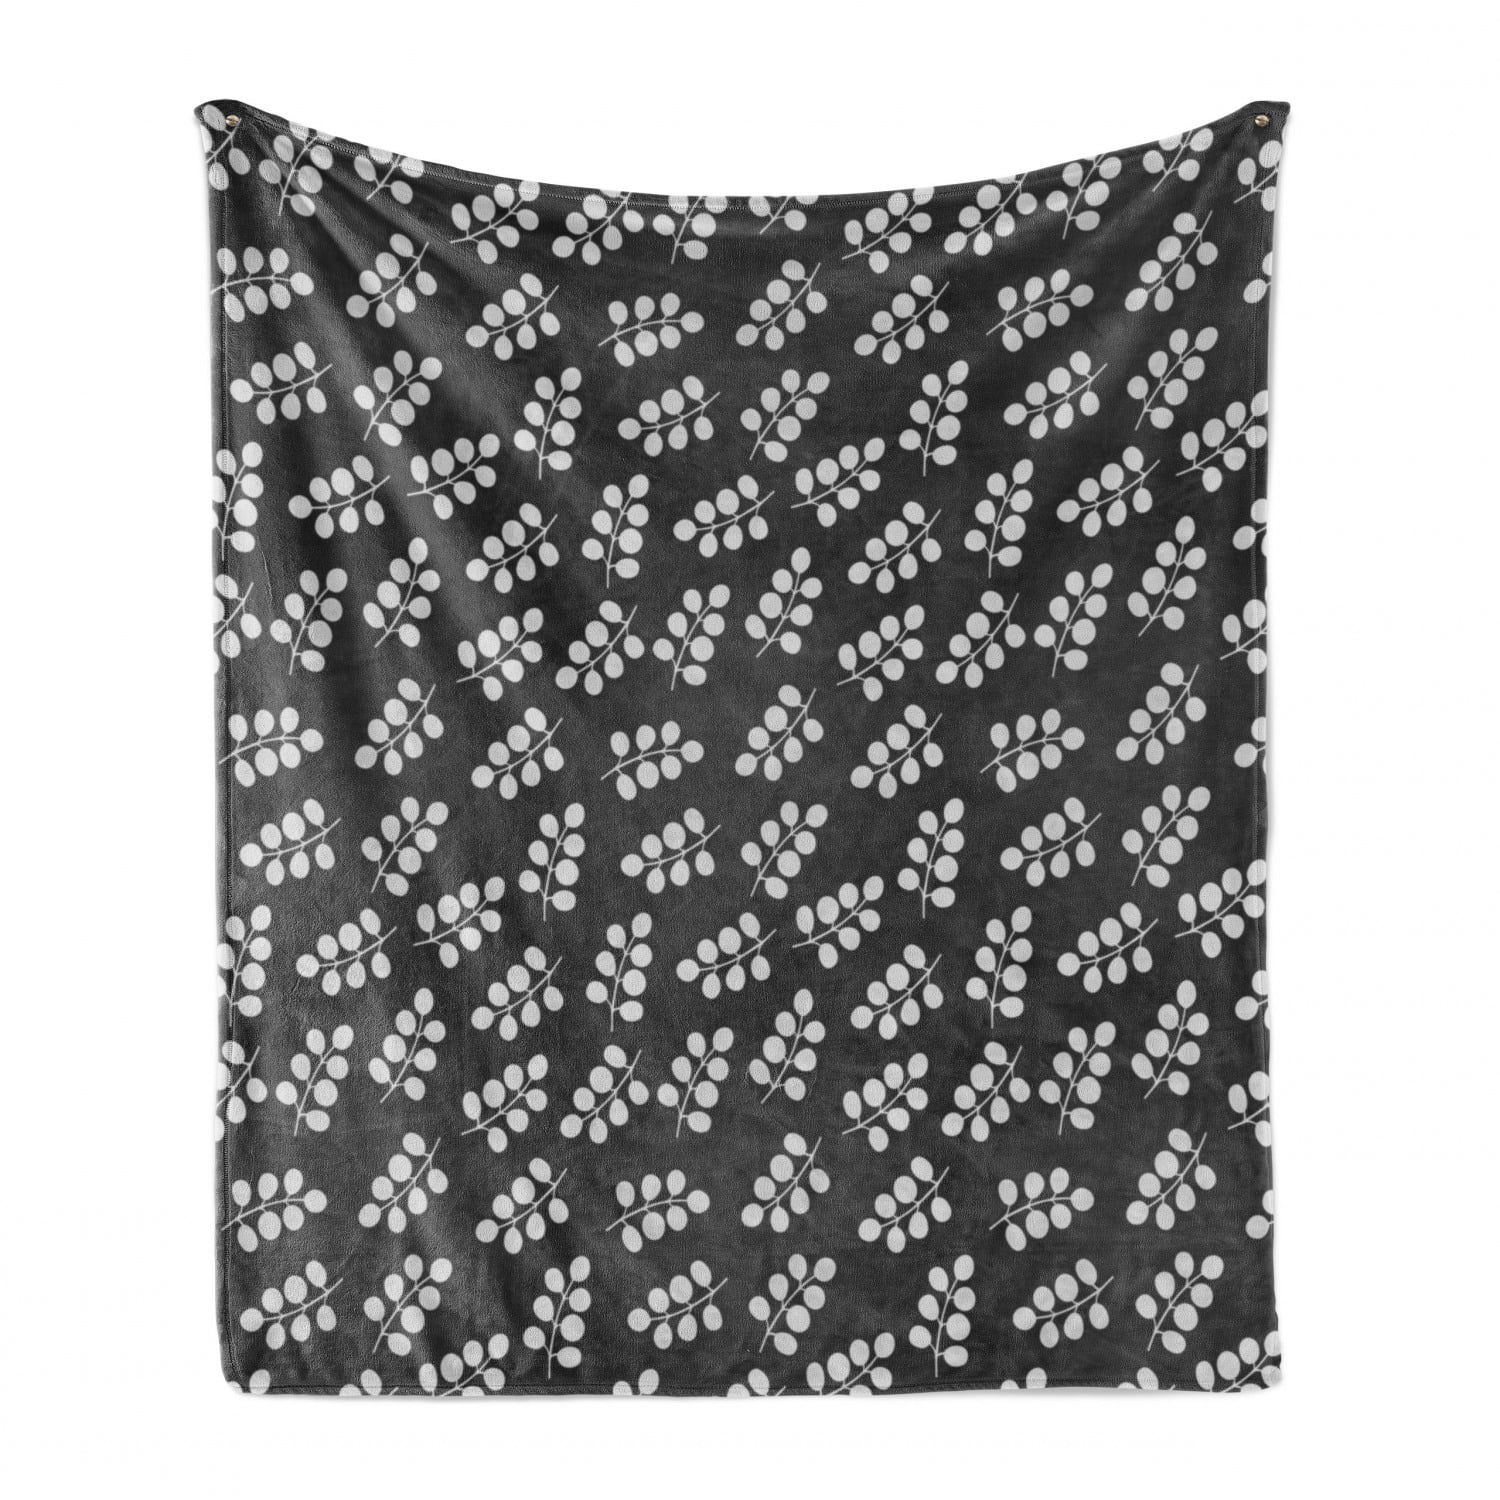 Abstract Leaves of Deciduous Trees Modern Monochrome Design Charcoal Grey and White 60 x 80 Ambesonne Grey and White Soft Flannel Fleece Throw Blanket Cozy Plush for Indoor and Outdoor Use 